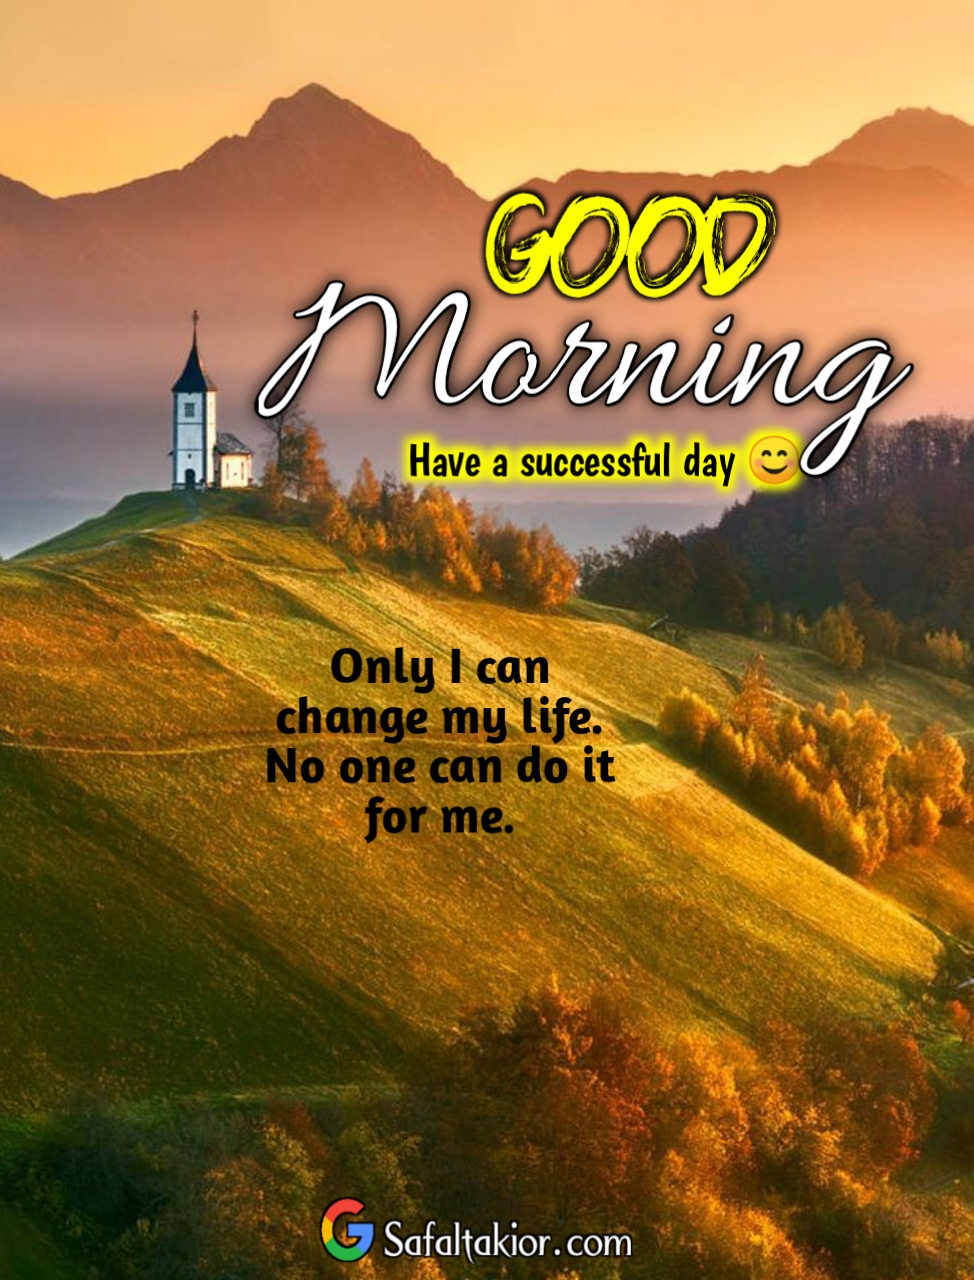 Good Morning 4k HD Images with Quotes